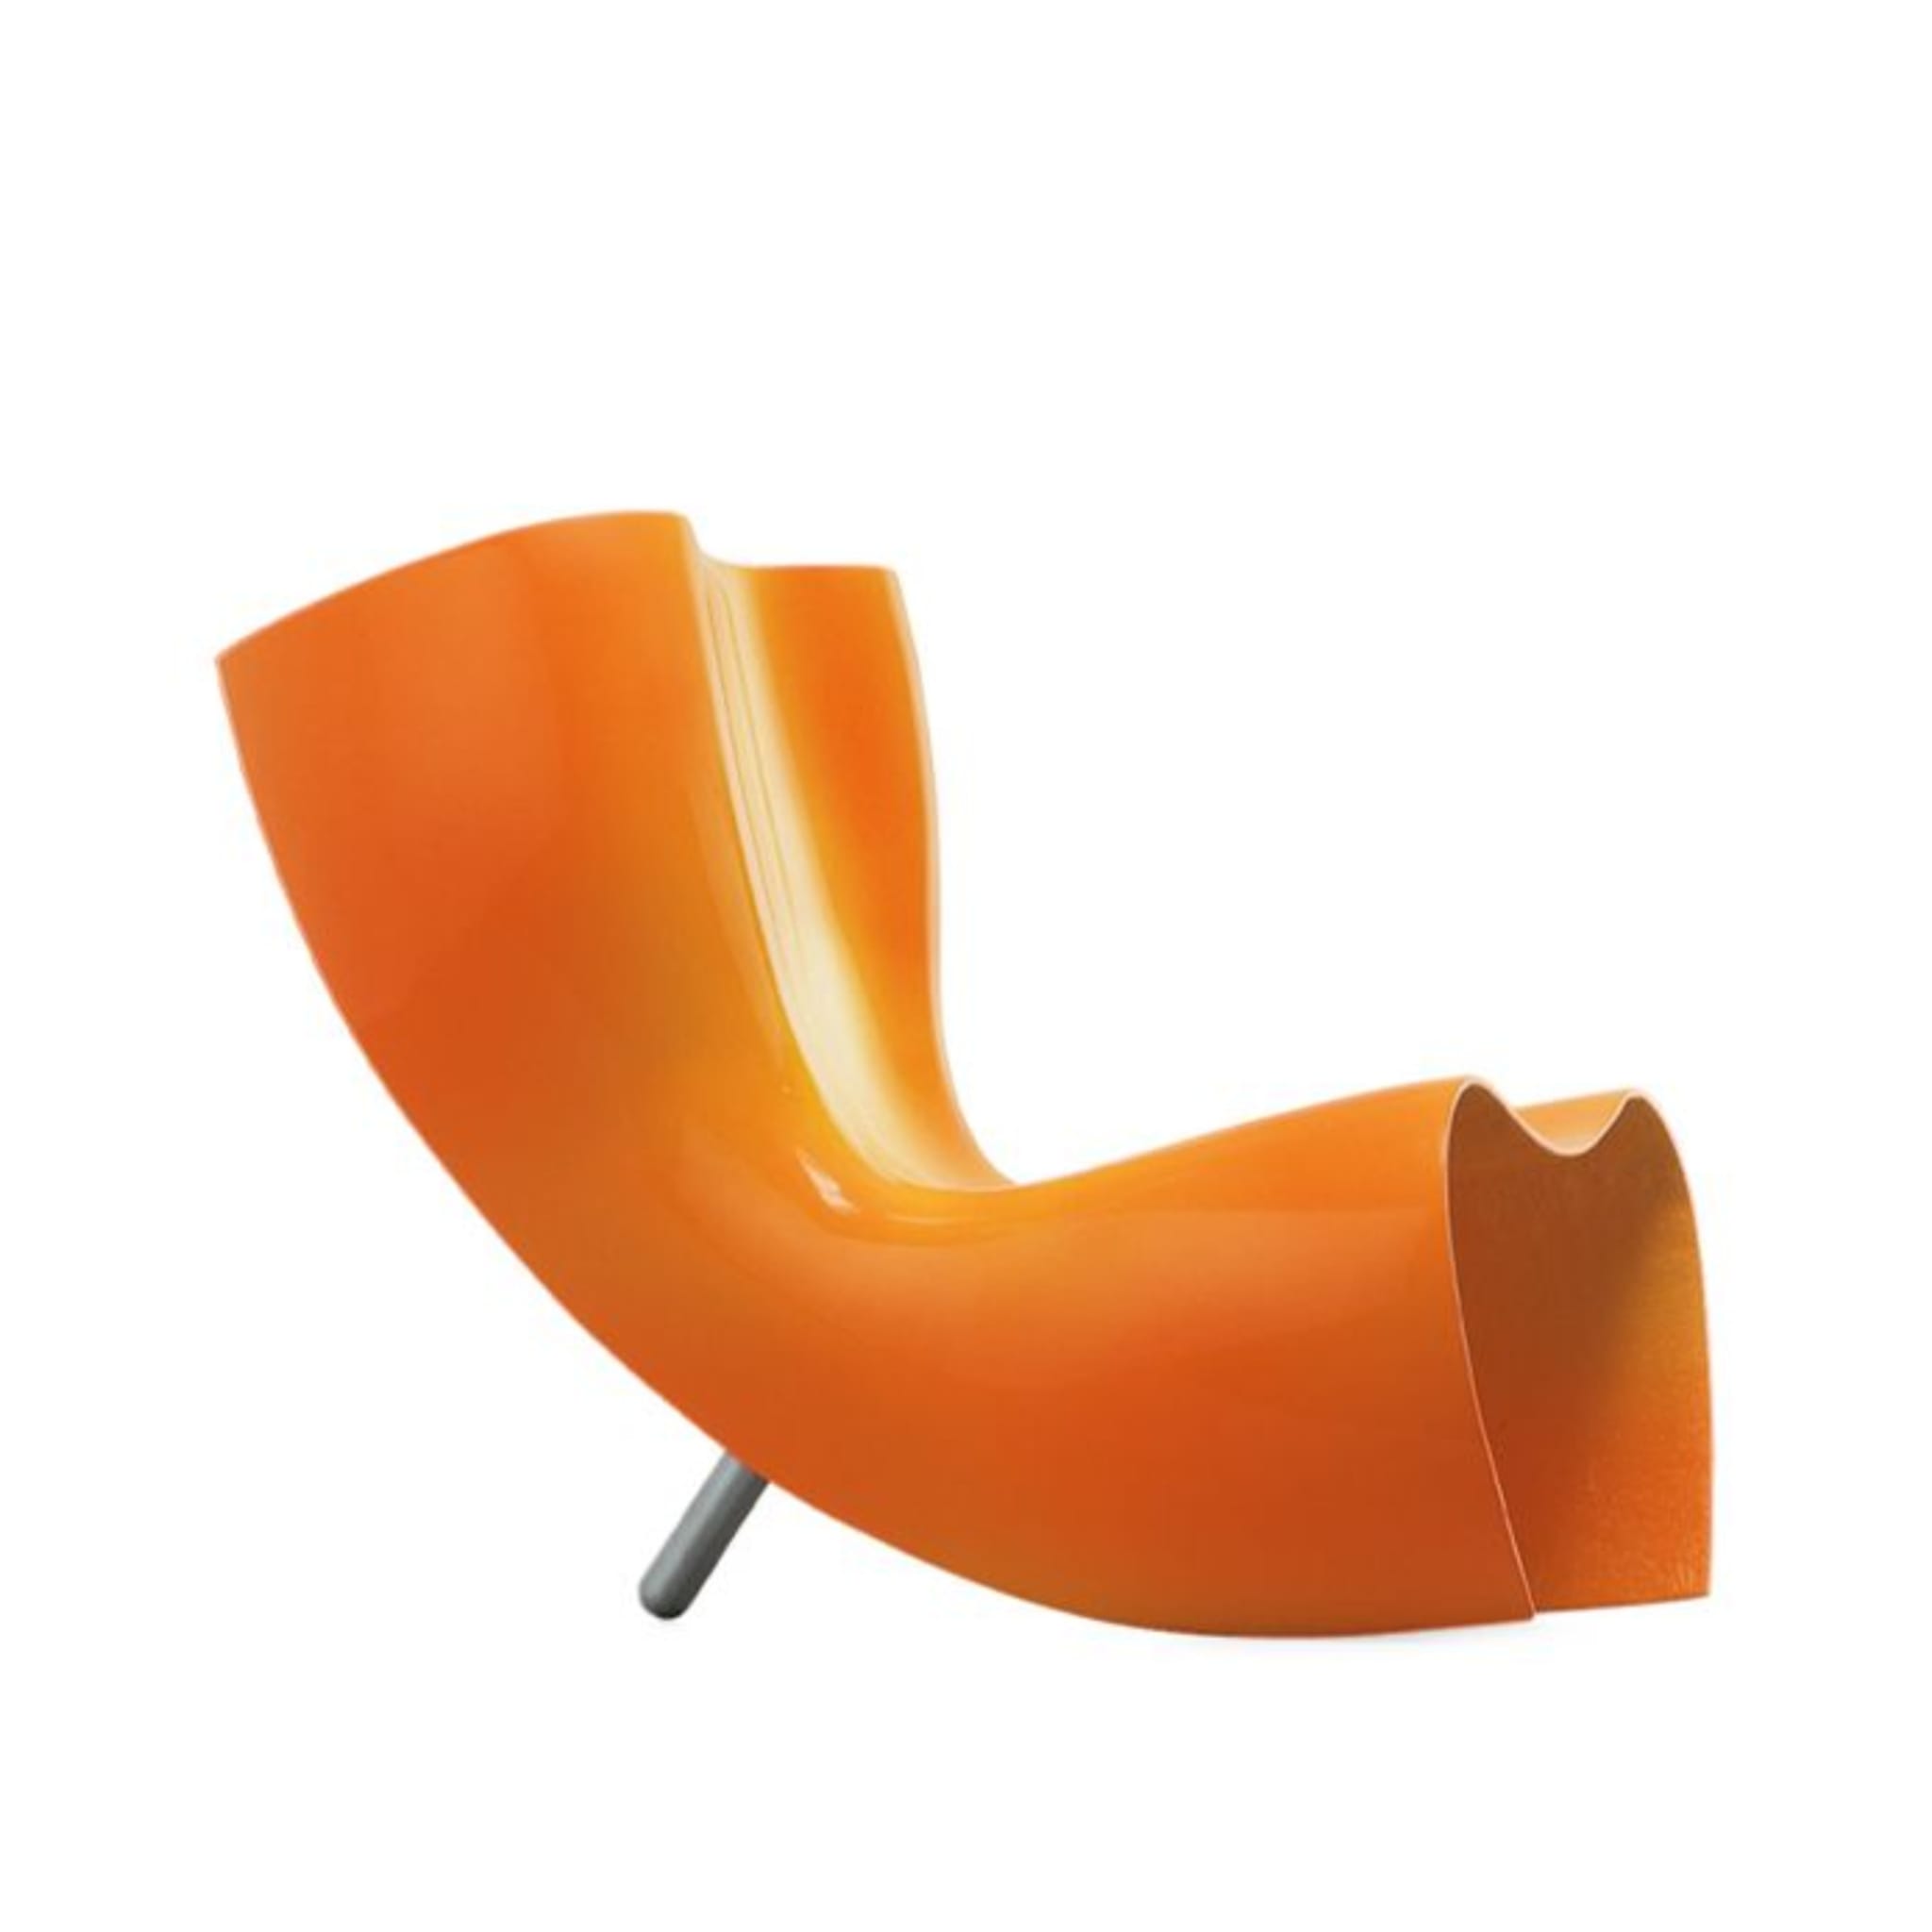 Marc Newson furniture collection